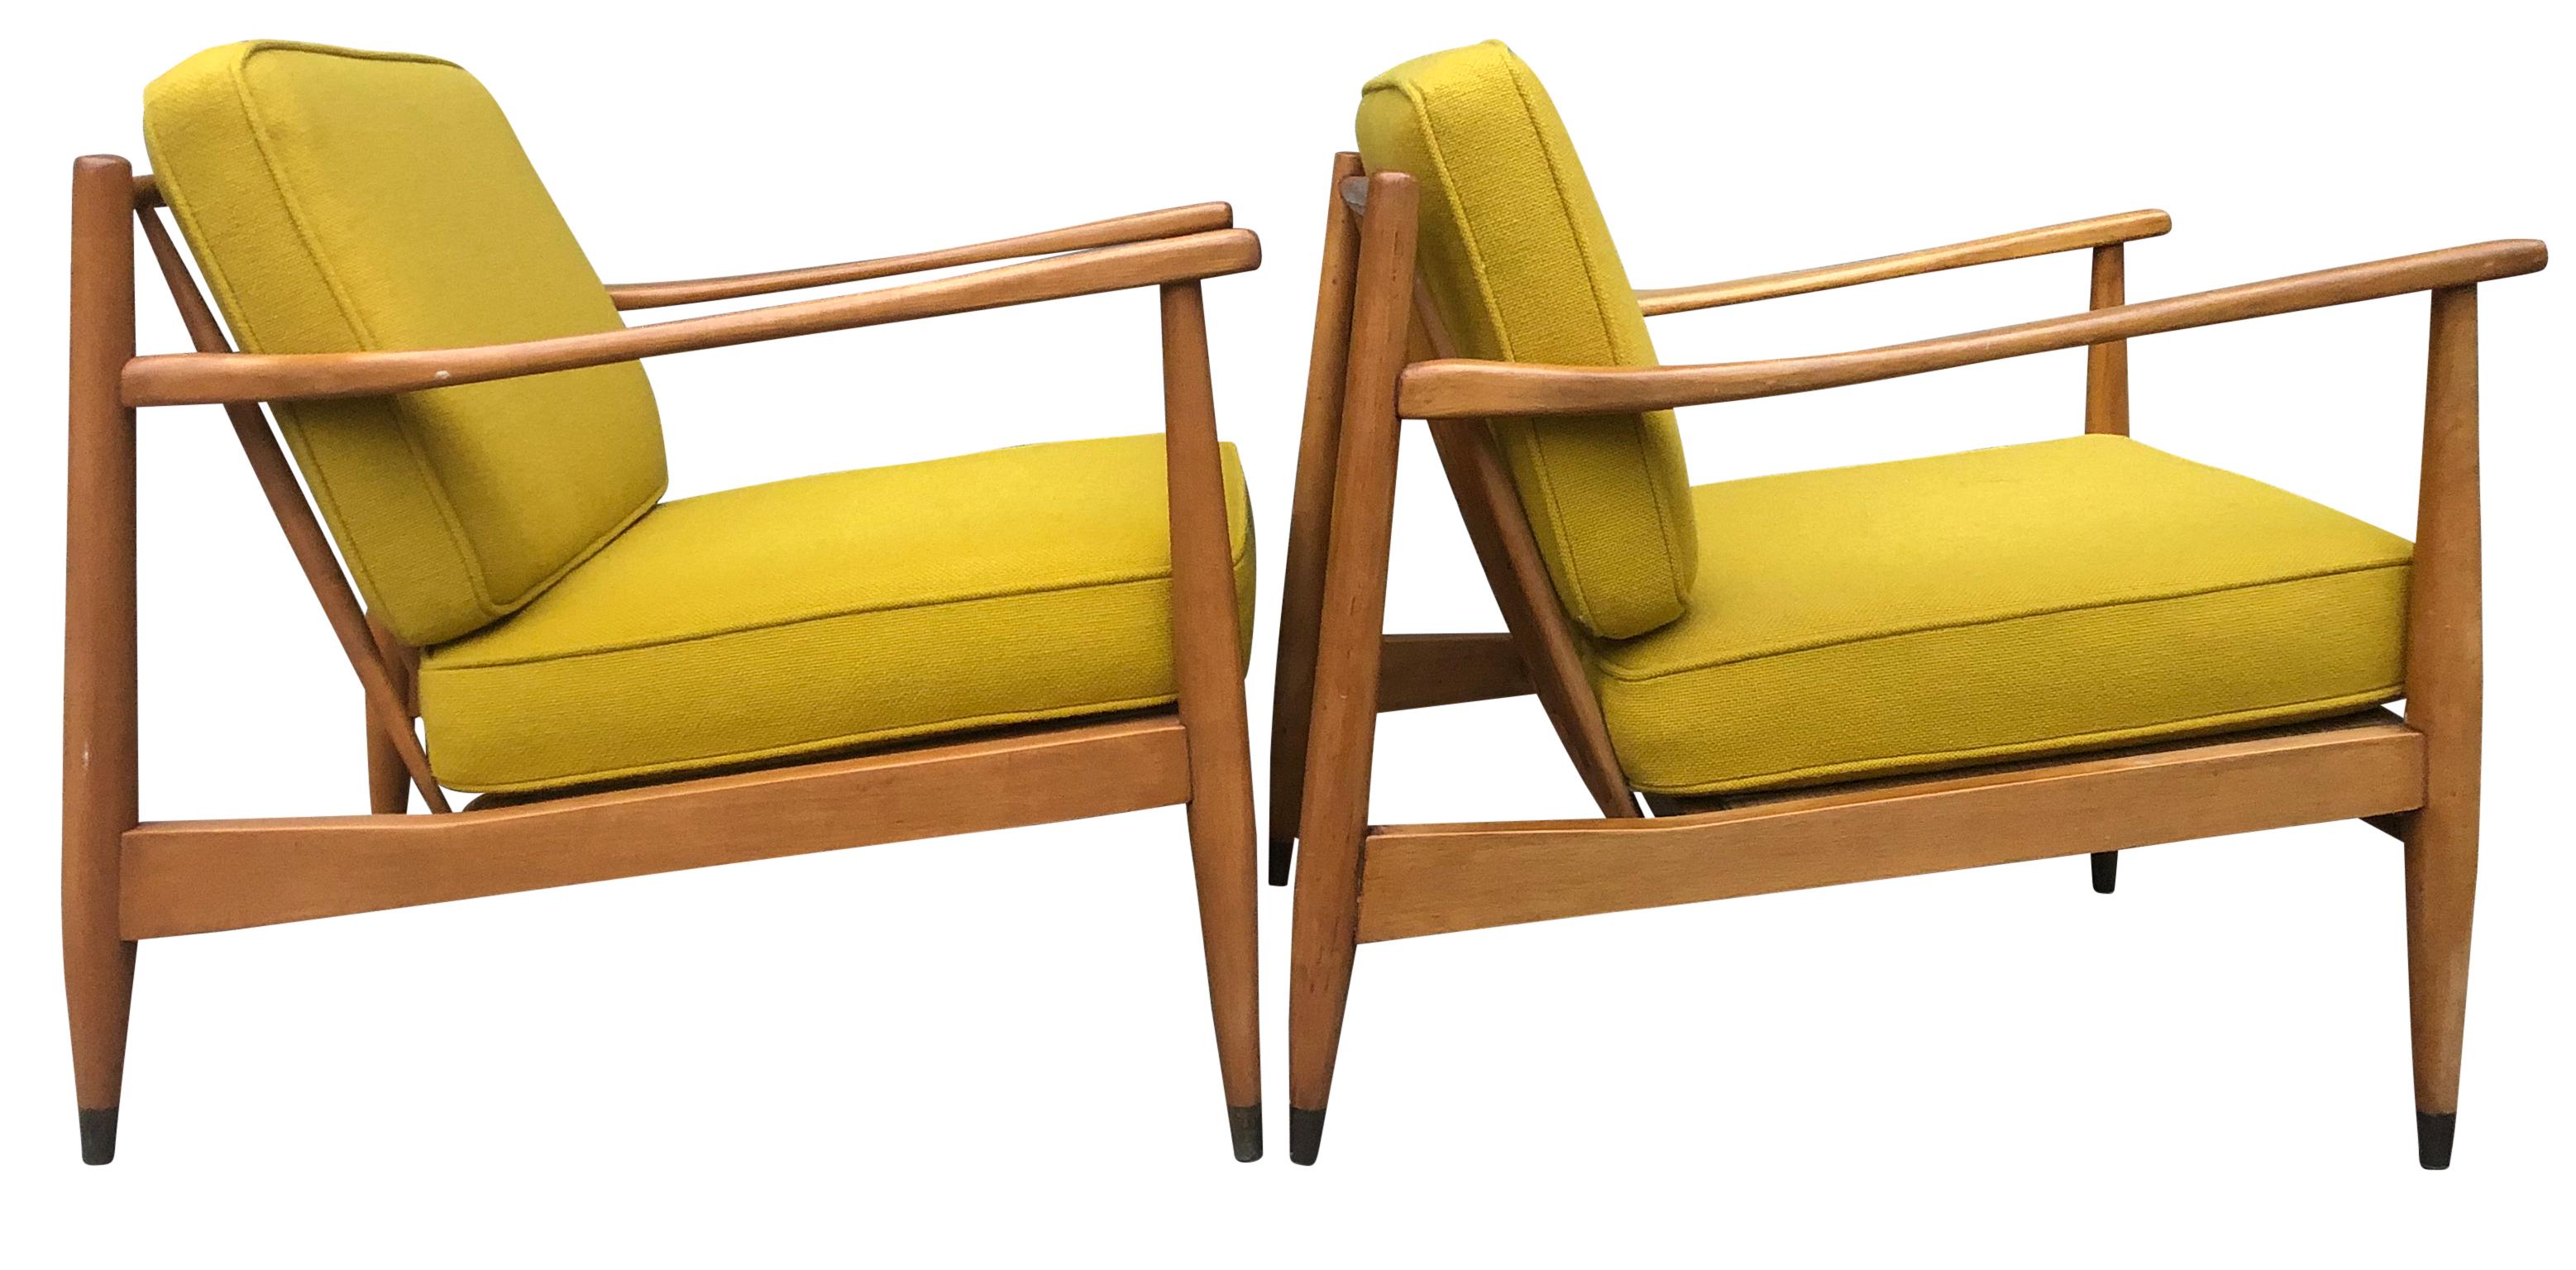 Pair of original midcentury Folke Ohlsson for DUX. All blonde low lounge chairs. Arms have unique curve - great lines. Solid Maple frames with spindle back and all Original rich gold/yellow thick woven upholstery. Original vintage condition with